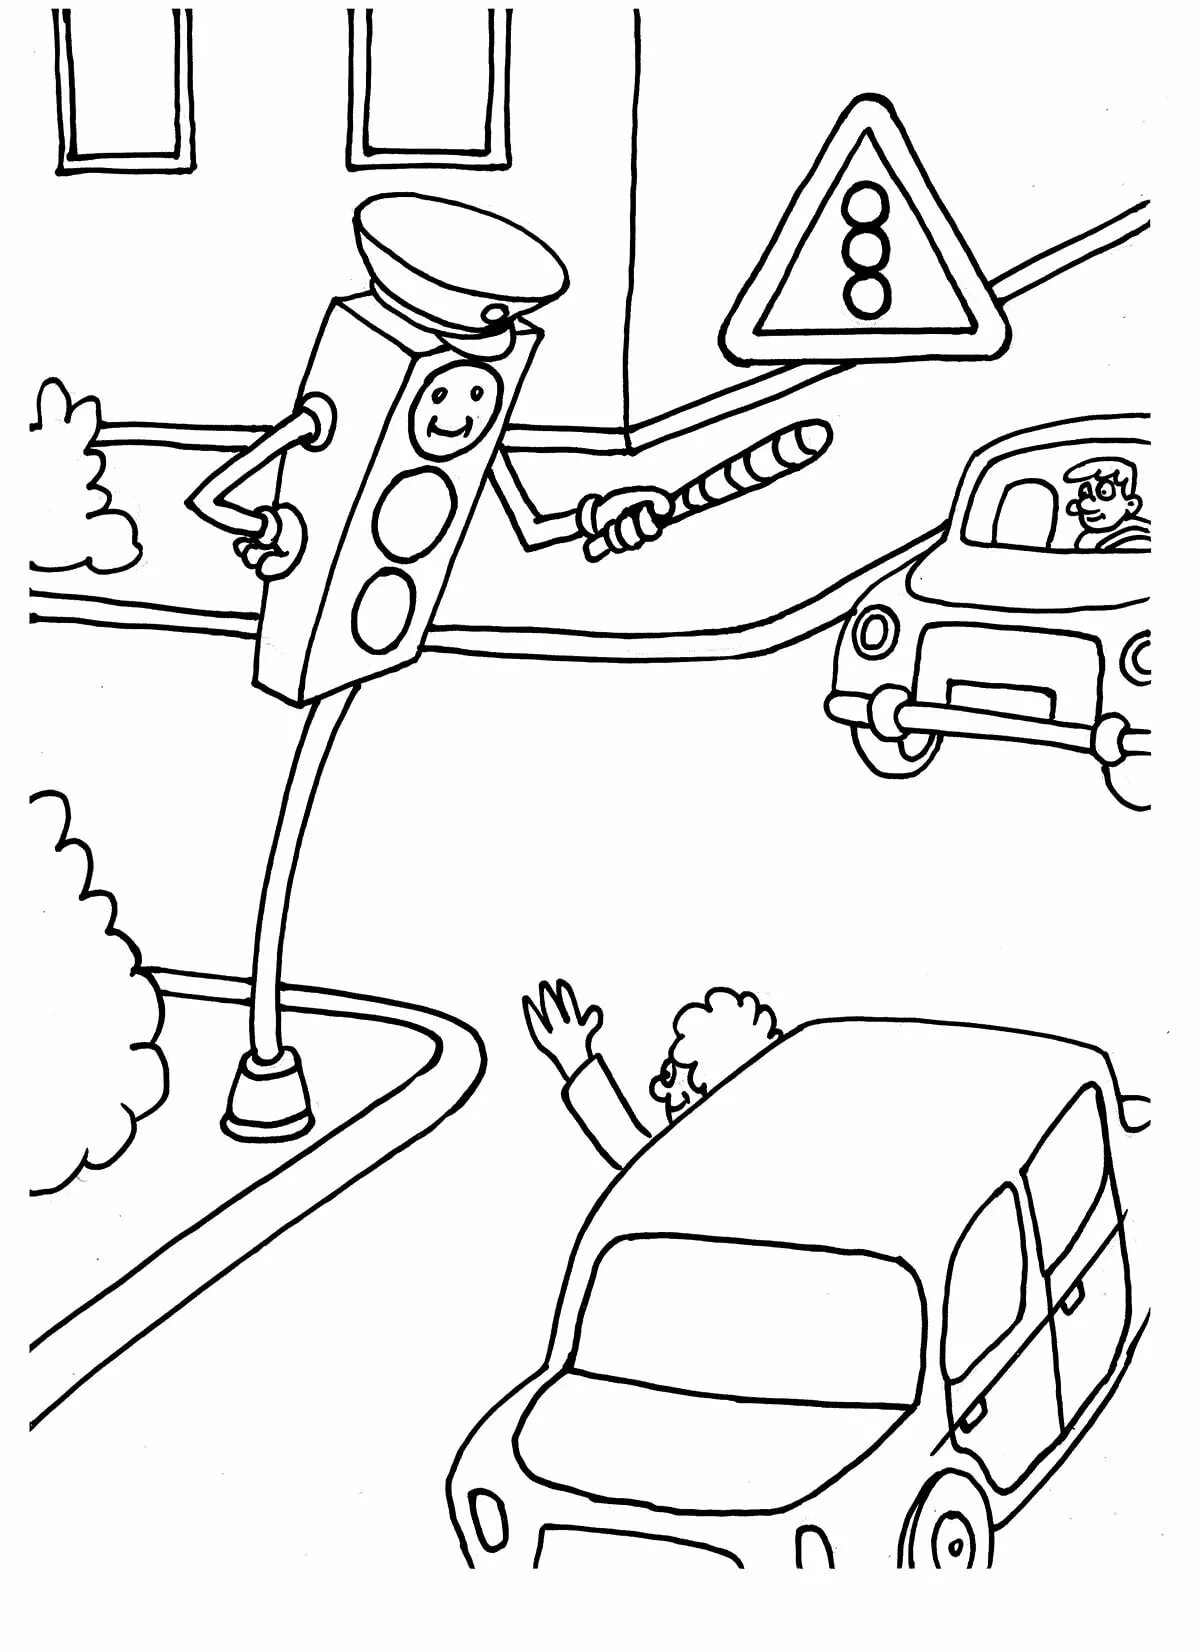 Colourful coloring book traffic rules in winter for kids